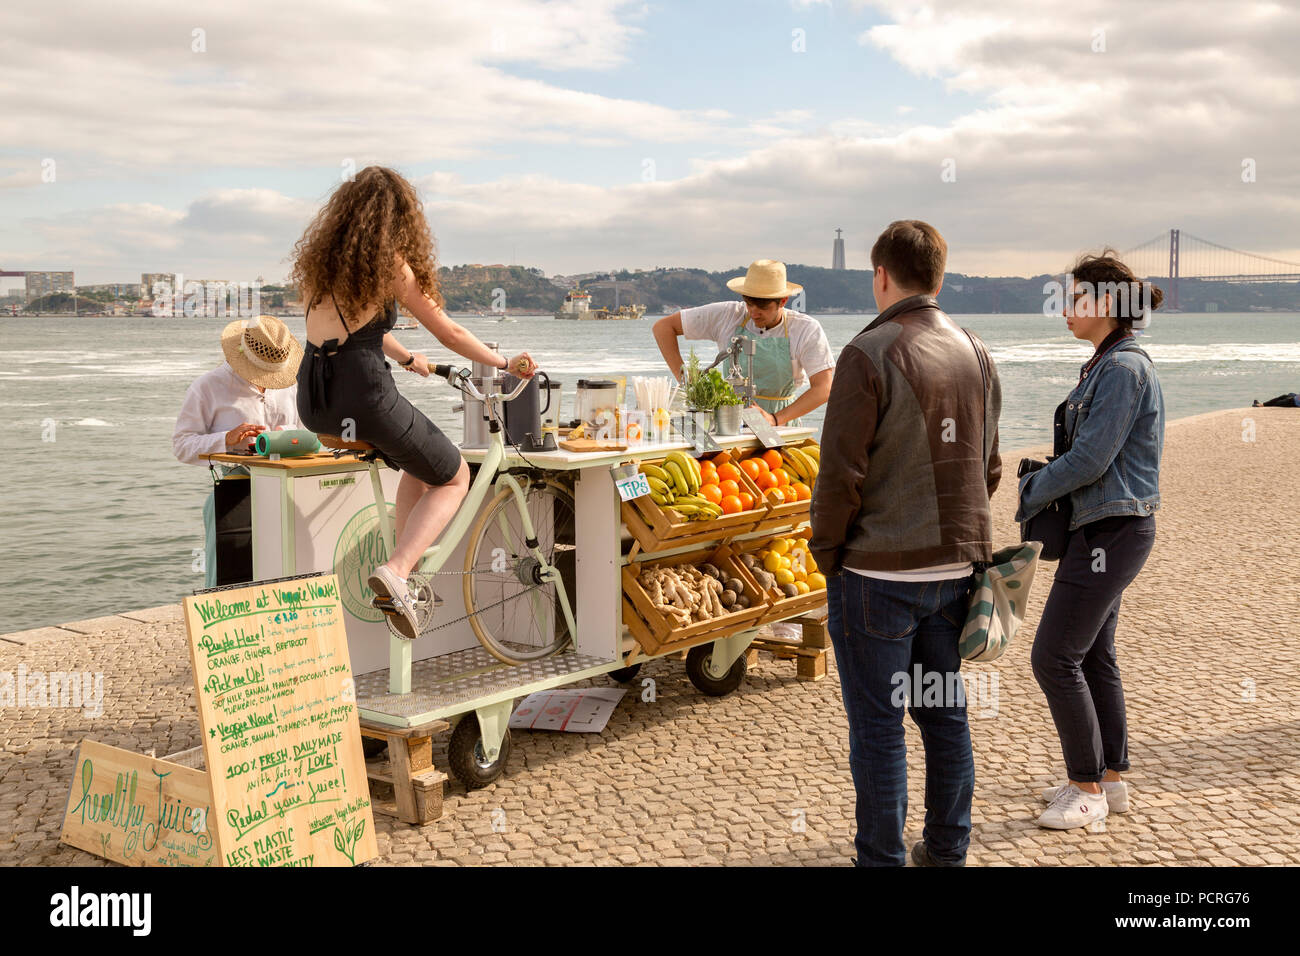 Young women rides bike to make smoothie, while tourist watch in Lisbon Portugal along the Tagus River.  Fresh smoothie stand Stock Photo